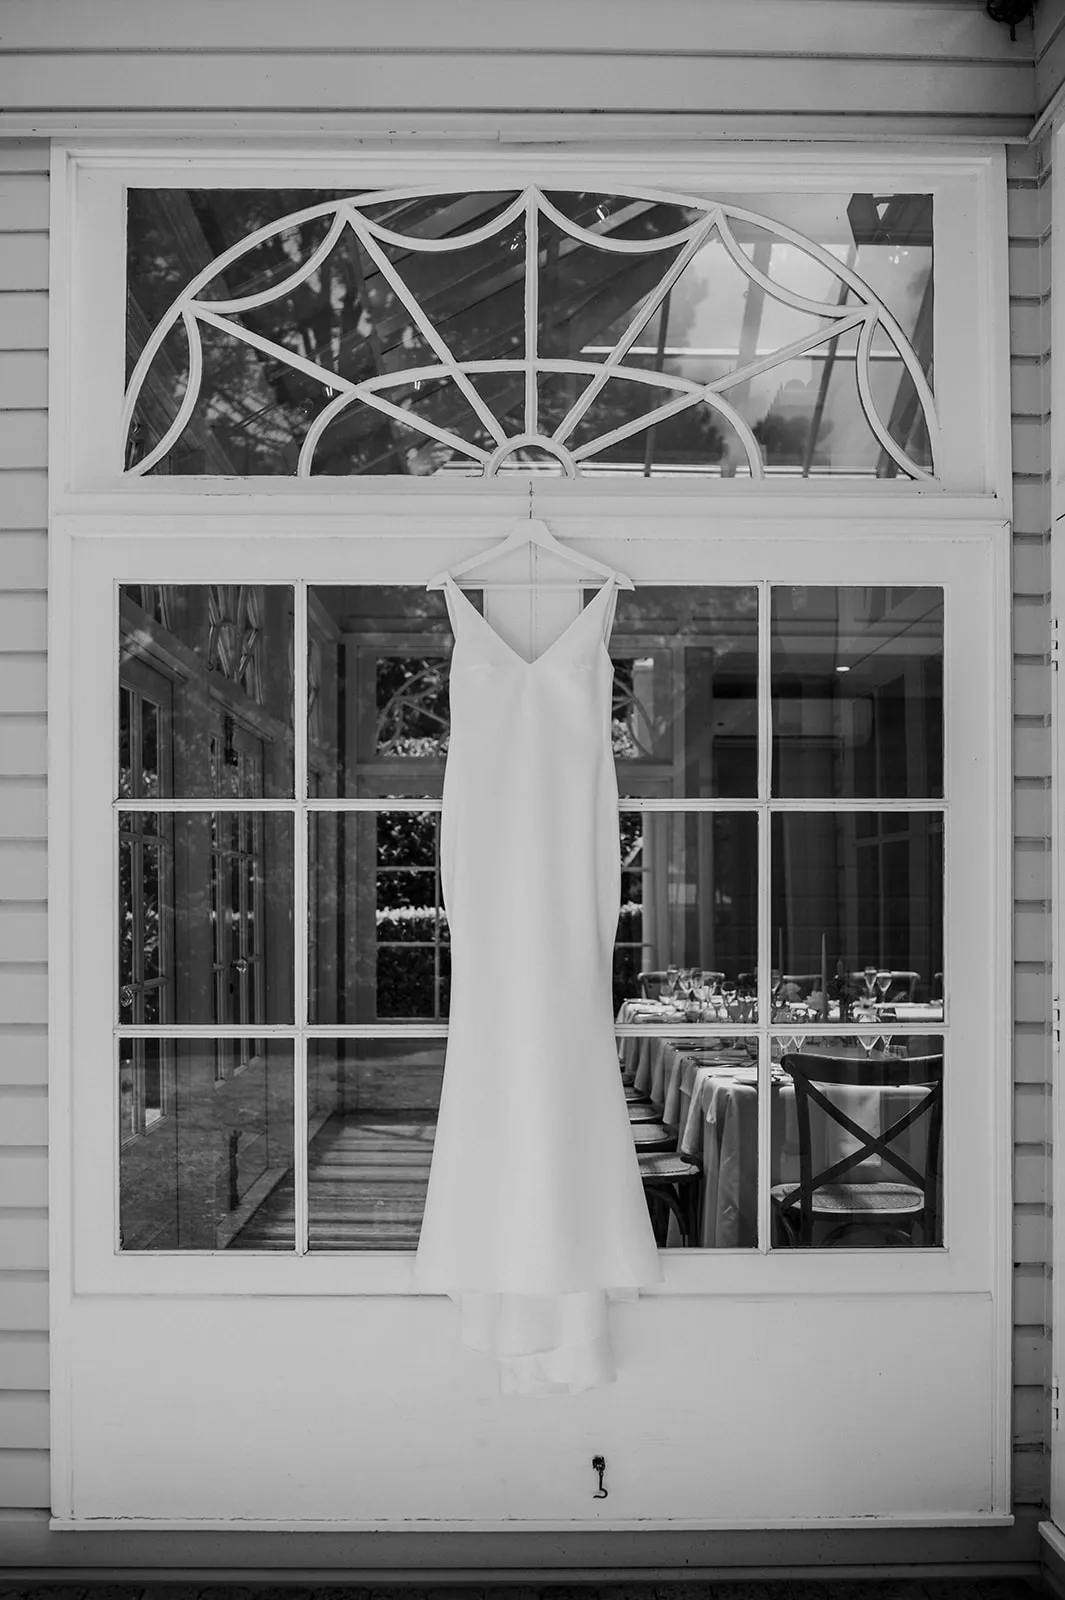 A white sleeveless wedding dress hangs elegantly on a large window with decorative trim. The window reveals a beautifully set dining area inside, with neatly arranged tables and chairs. The scene is captured in black and white.